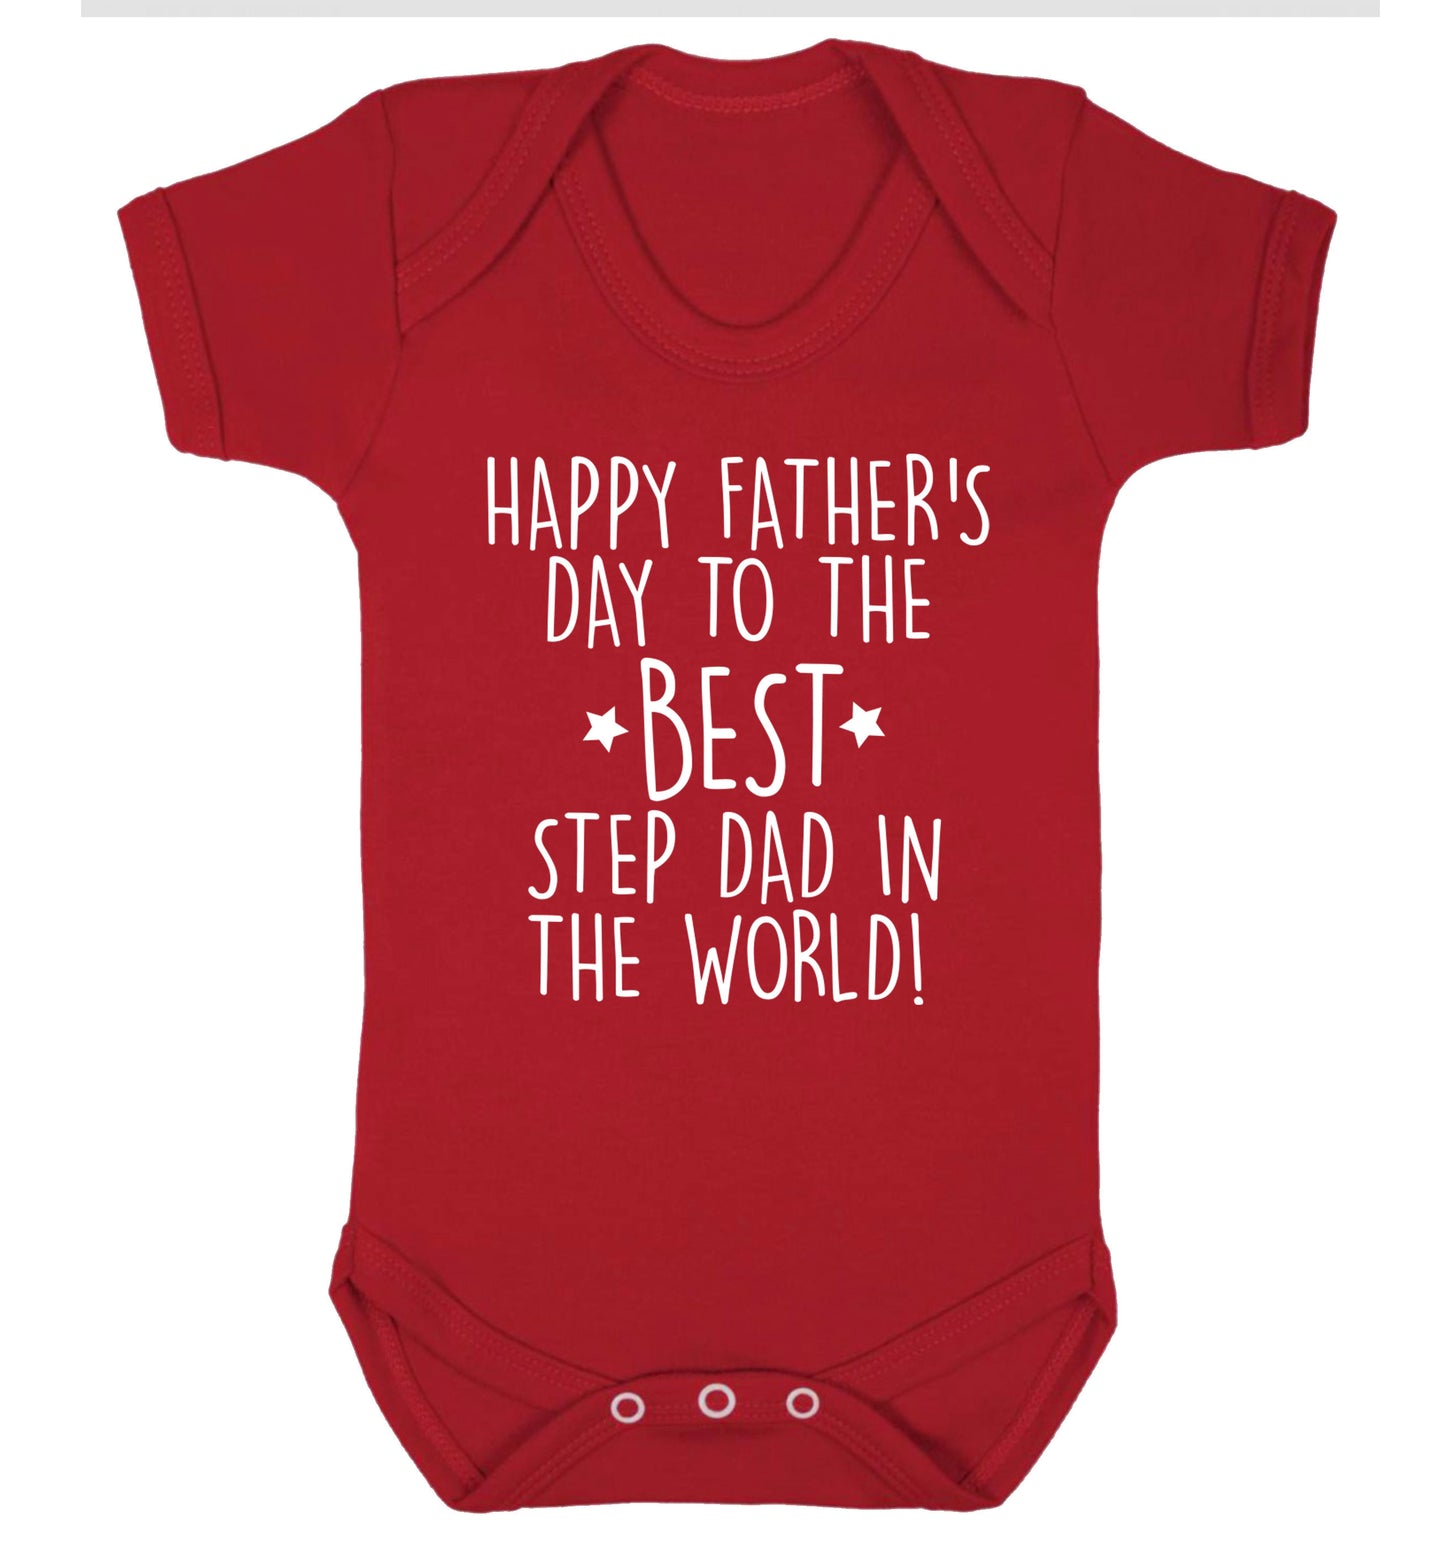 Happy Father's day to the best step dad in the world! Baby Vest red 18-24 months